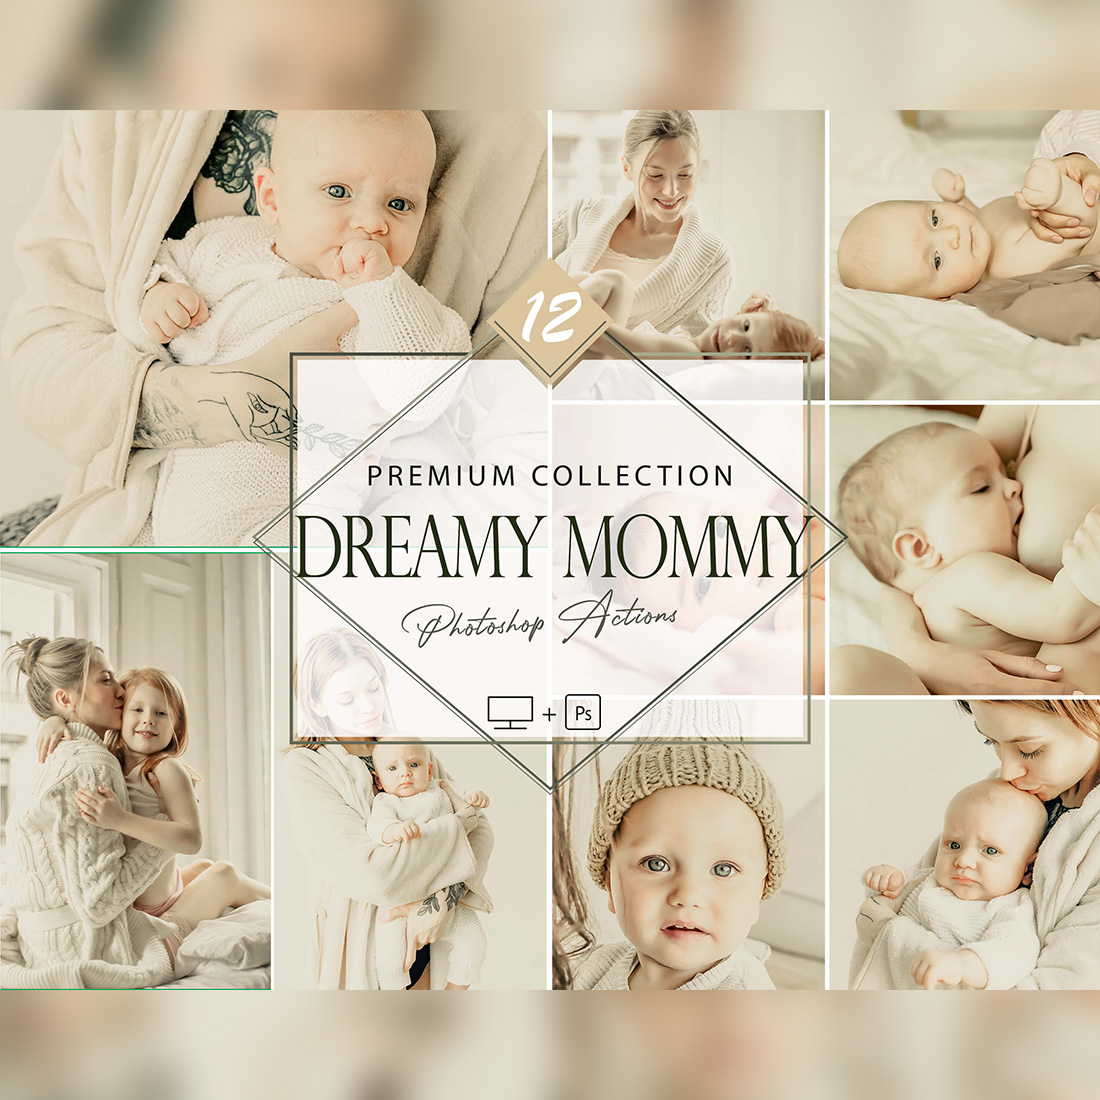 12 Dreamy Mommy Photoshop Actions, Motherhood ACR Preset, Family Filter, Portrait And Lifestyle Theme For Instagram, Blogger, Outdoor cover image.